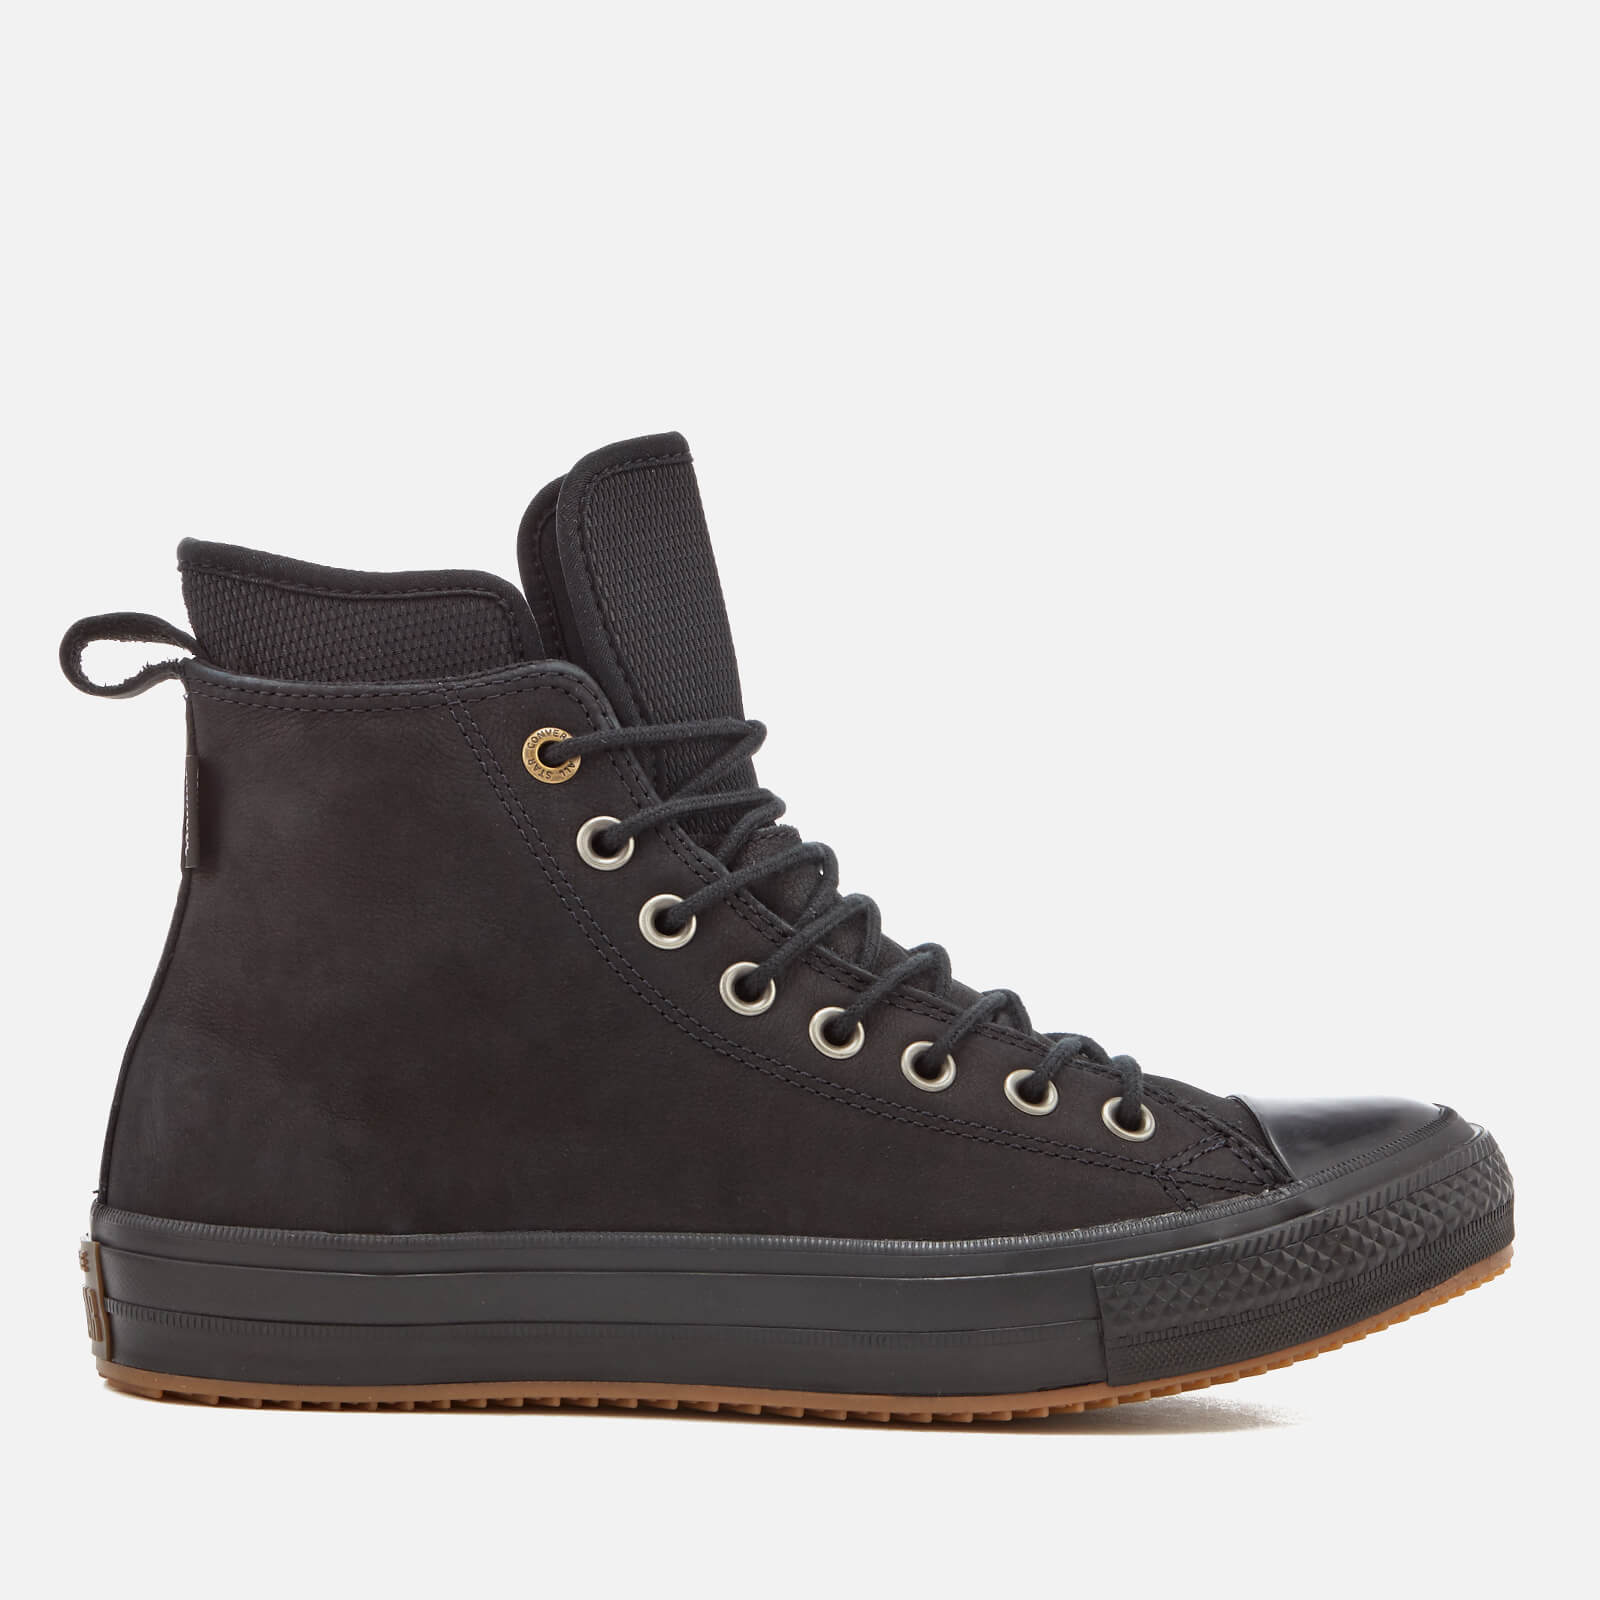 Converse Chuck Taylor Crafted Boot Hi 